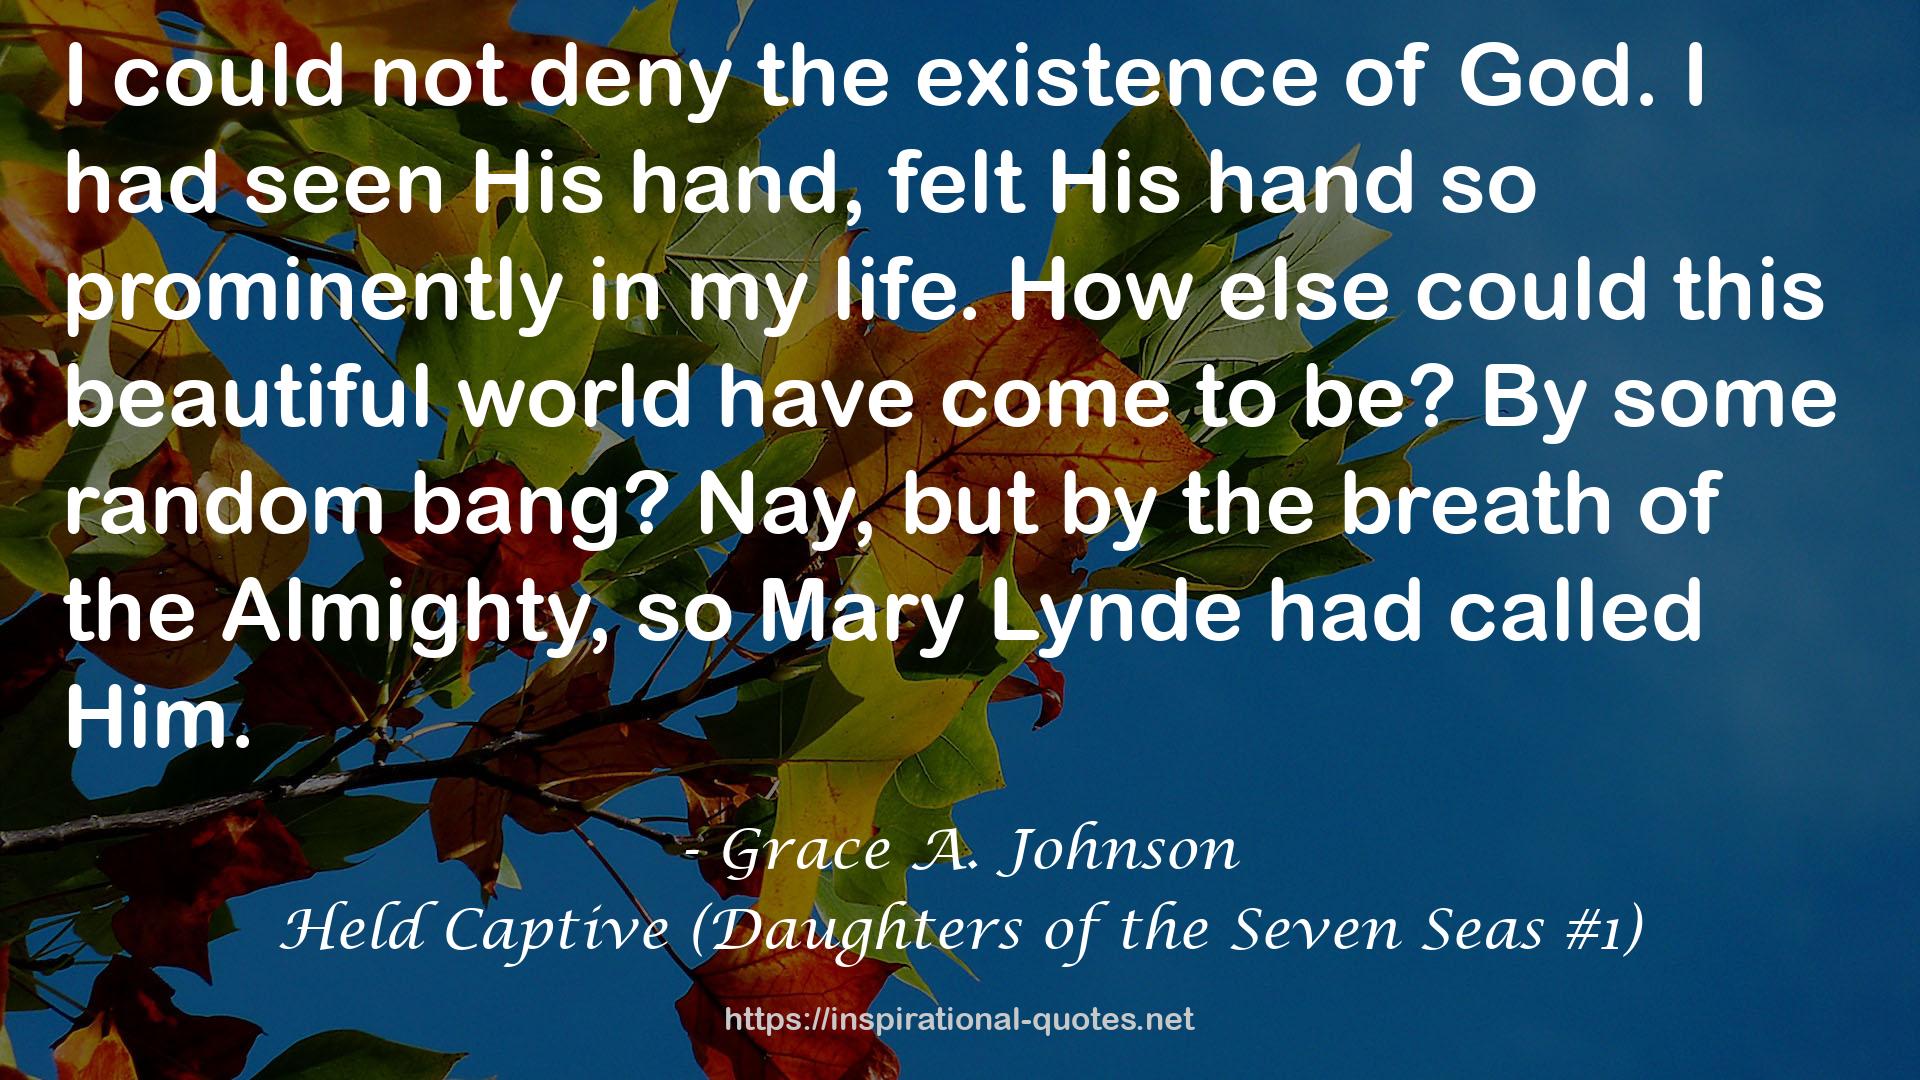 Held Captive (Daughters of the Seven Seas #1) QUOTES